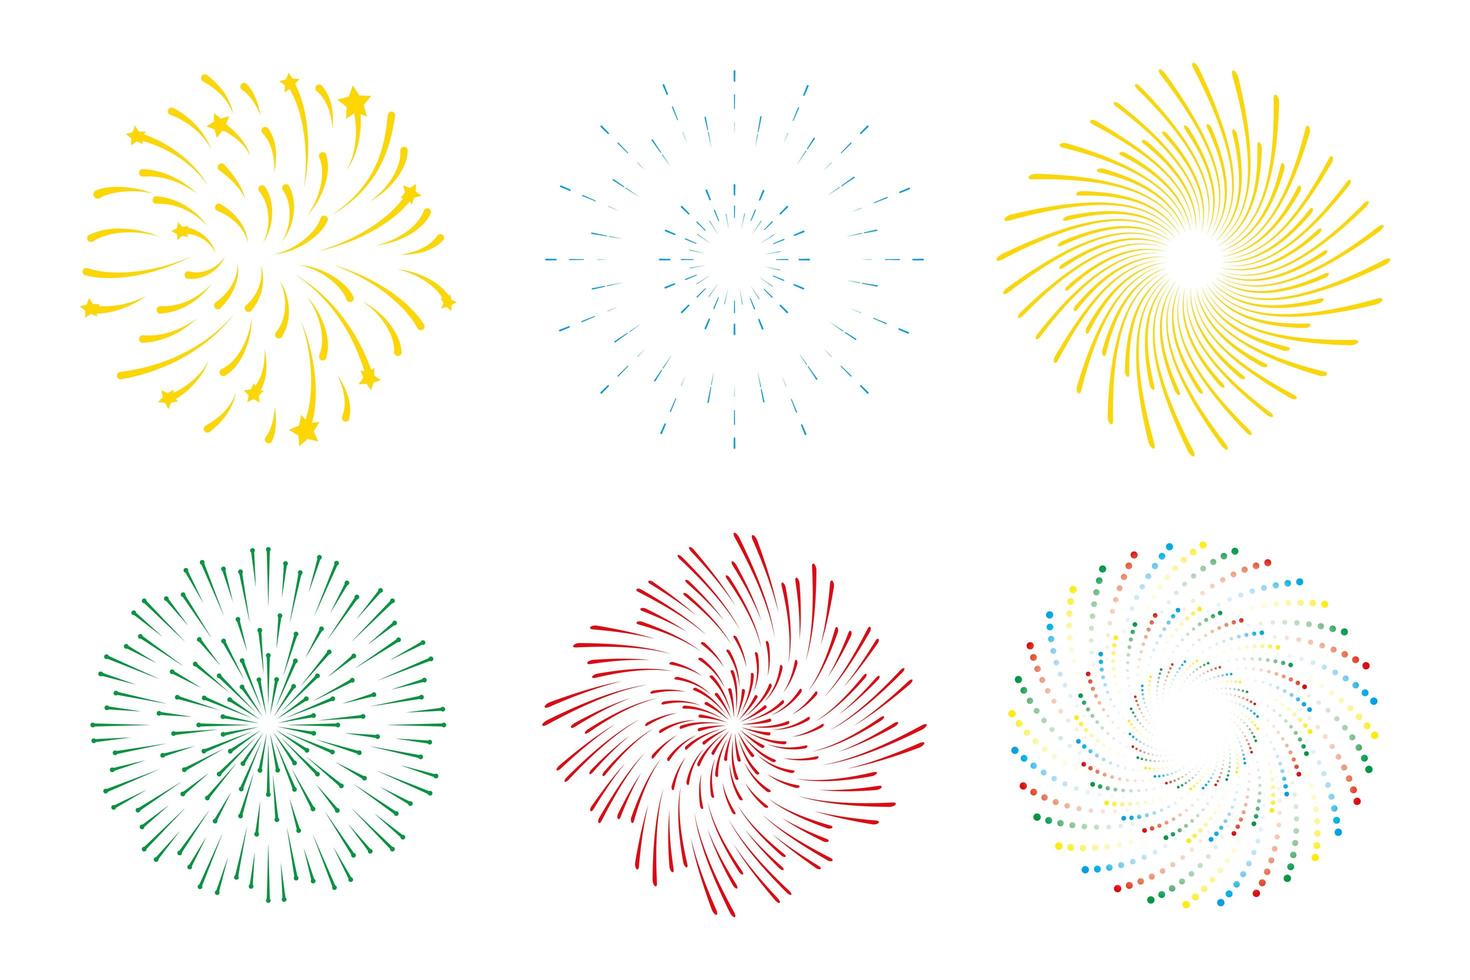 Fireworks burst explosions on a white background vector